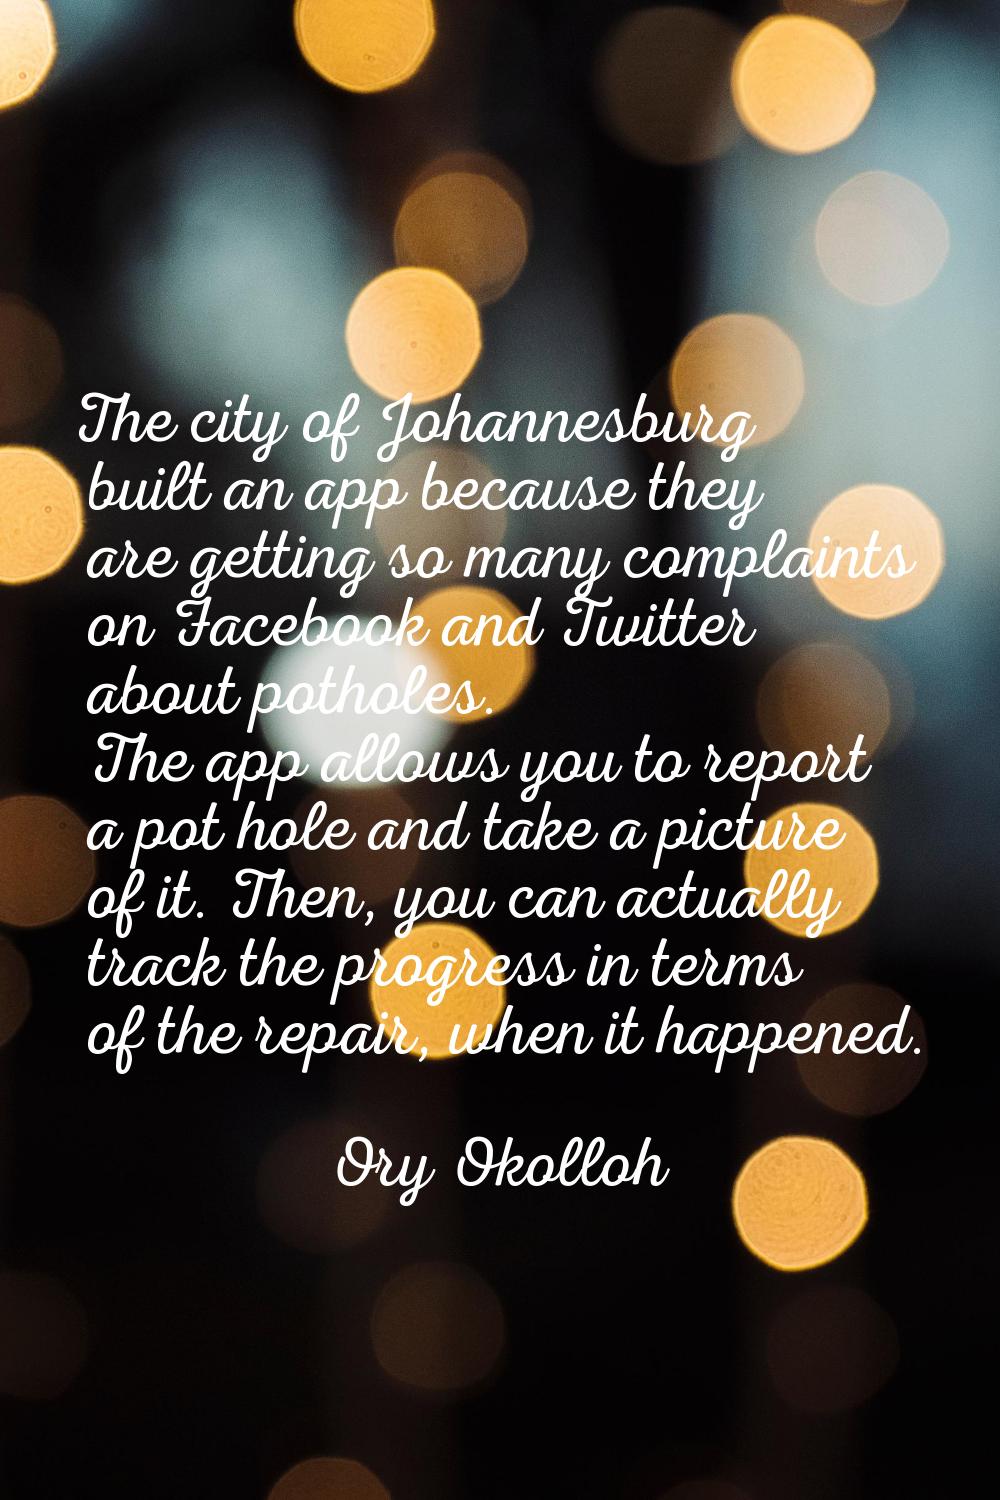 The city of Johannesburg built an app because they are getting so many complaints on Facebook and T